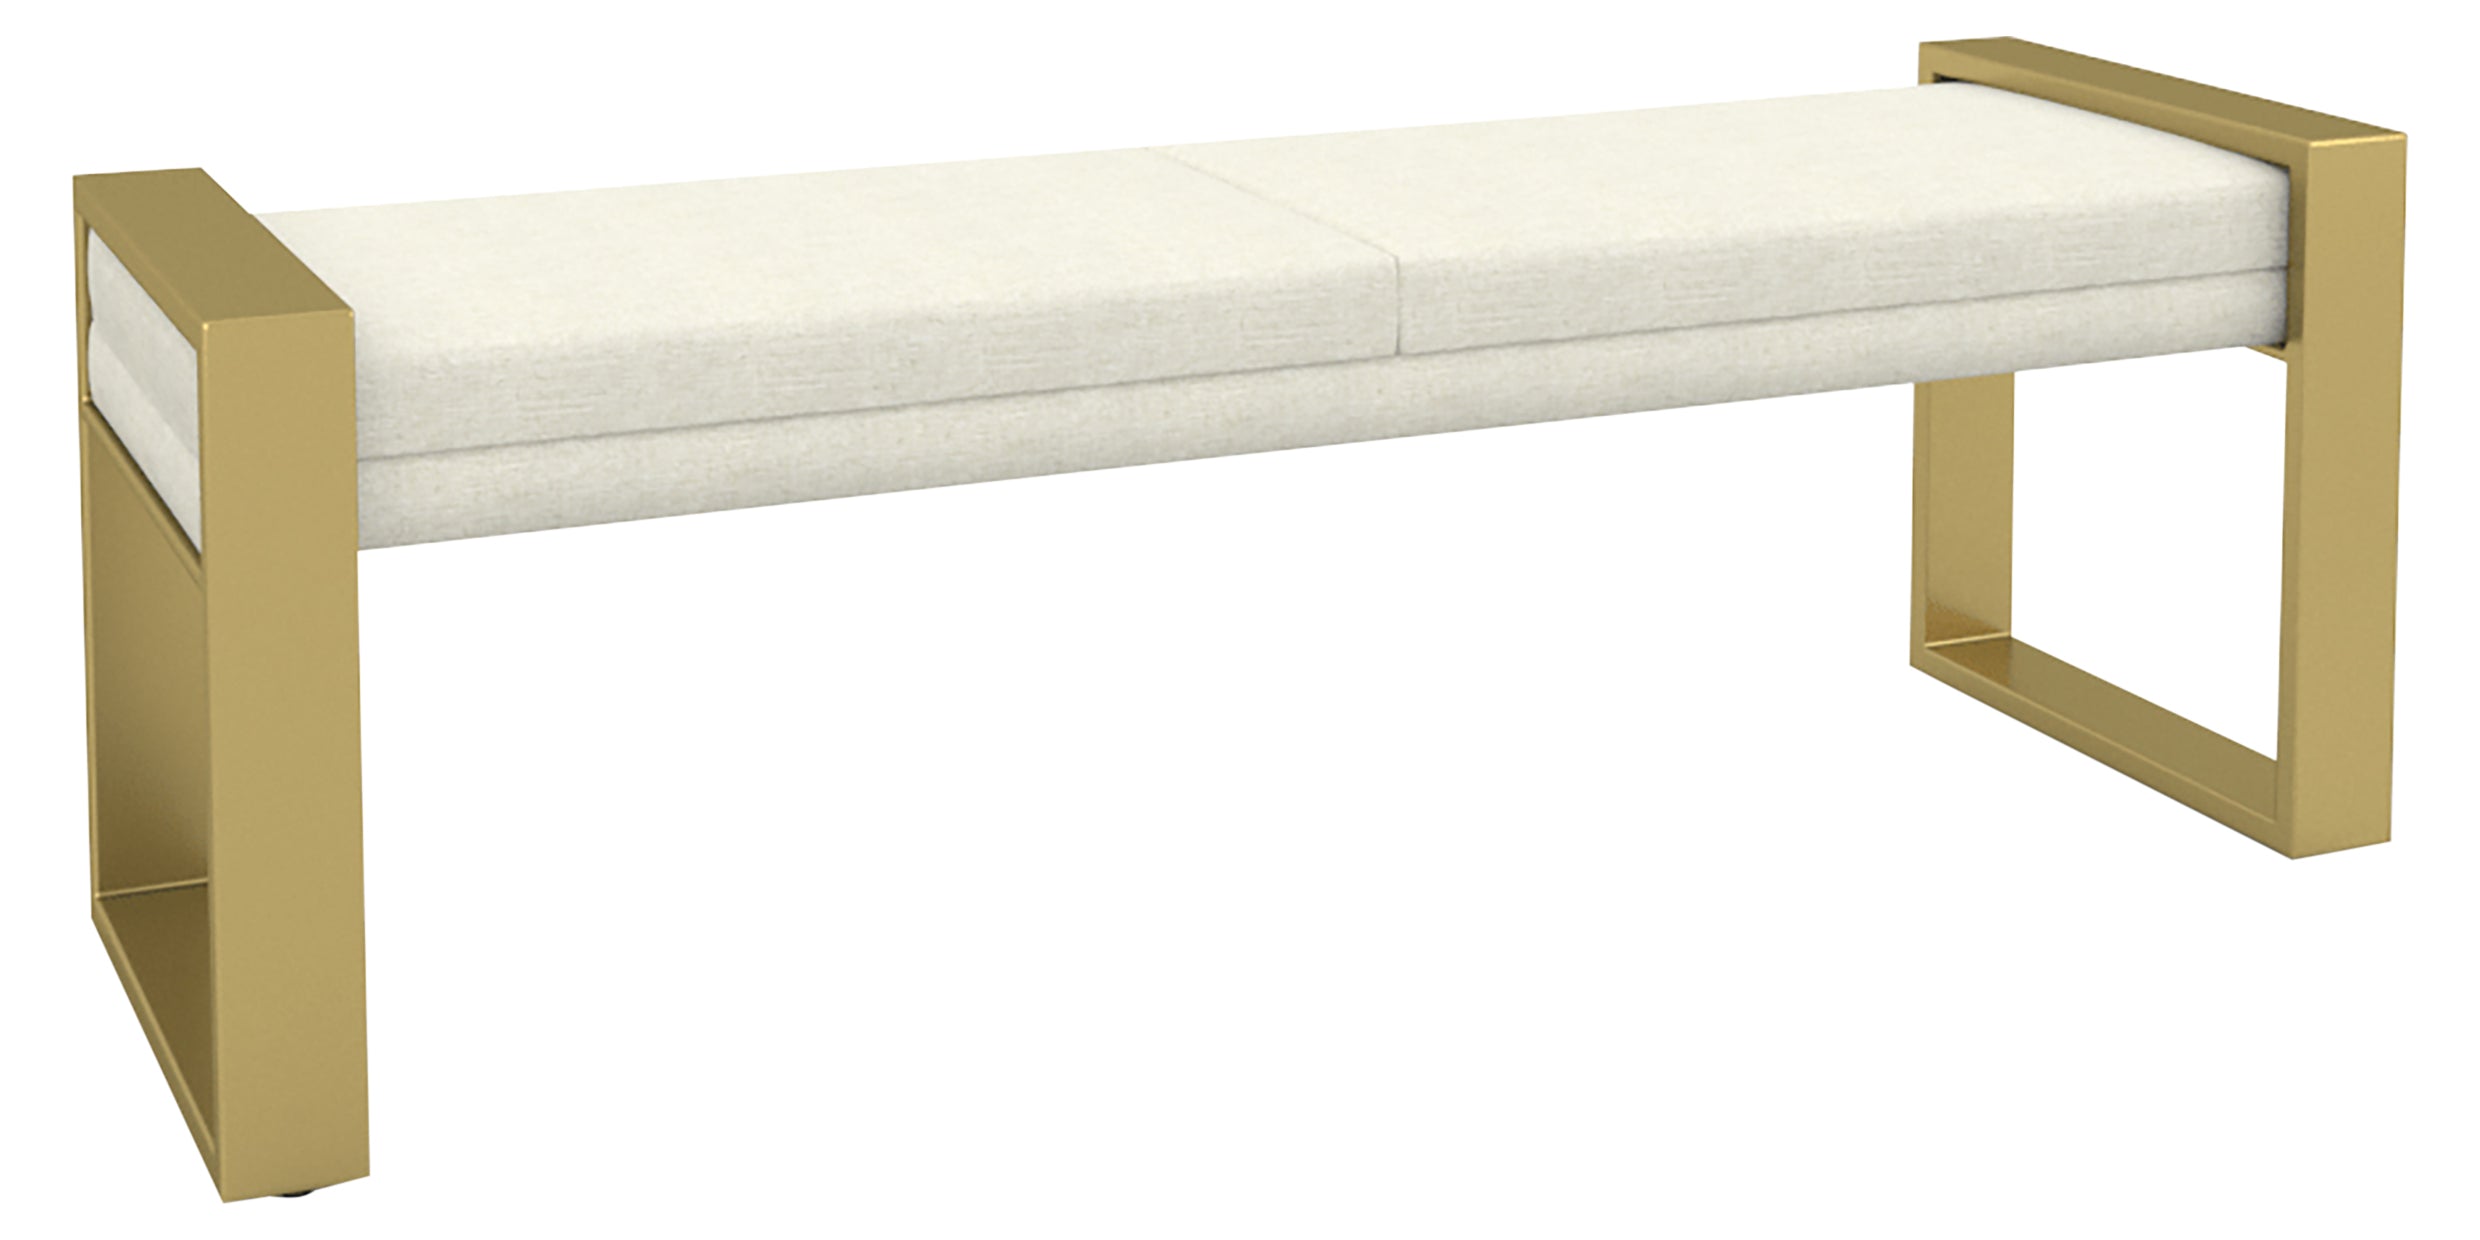 56.25in Length | Canadel Modern Bench 8913 | Valley Ridge Furniture